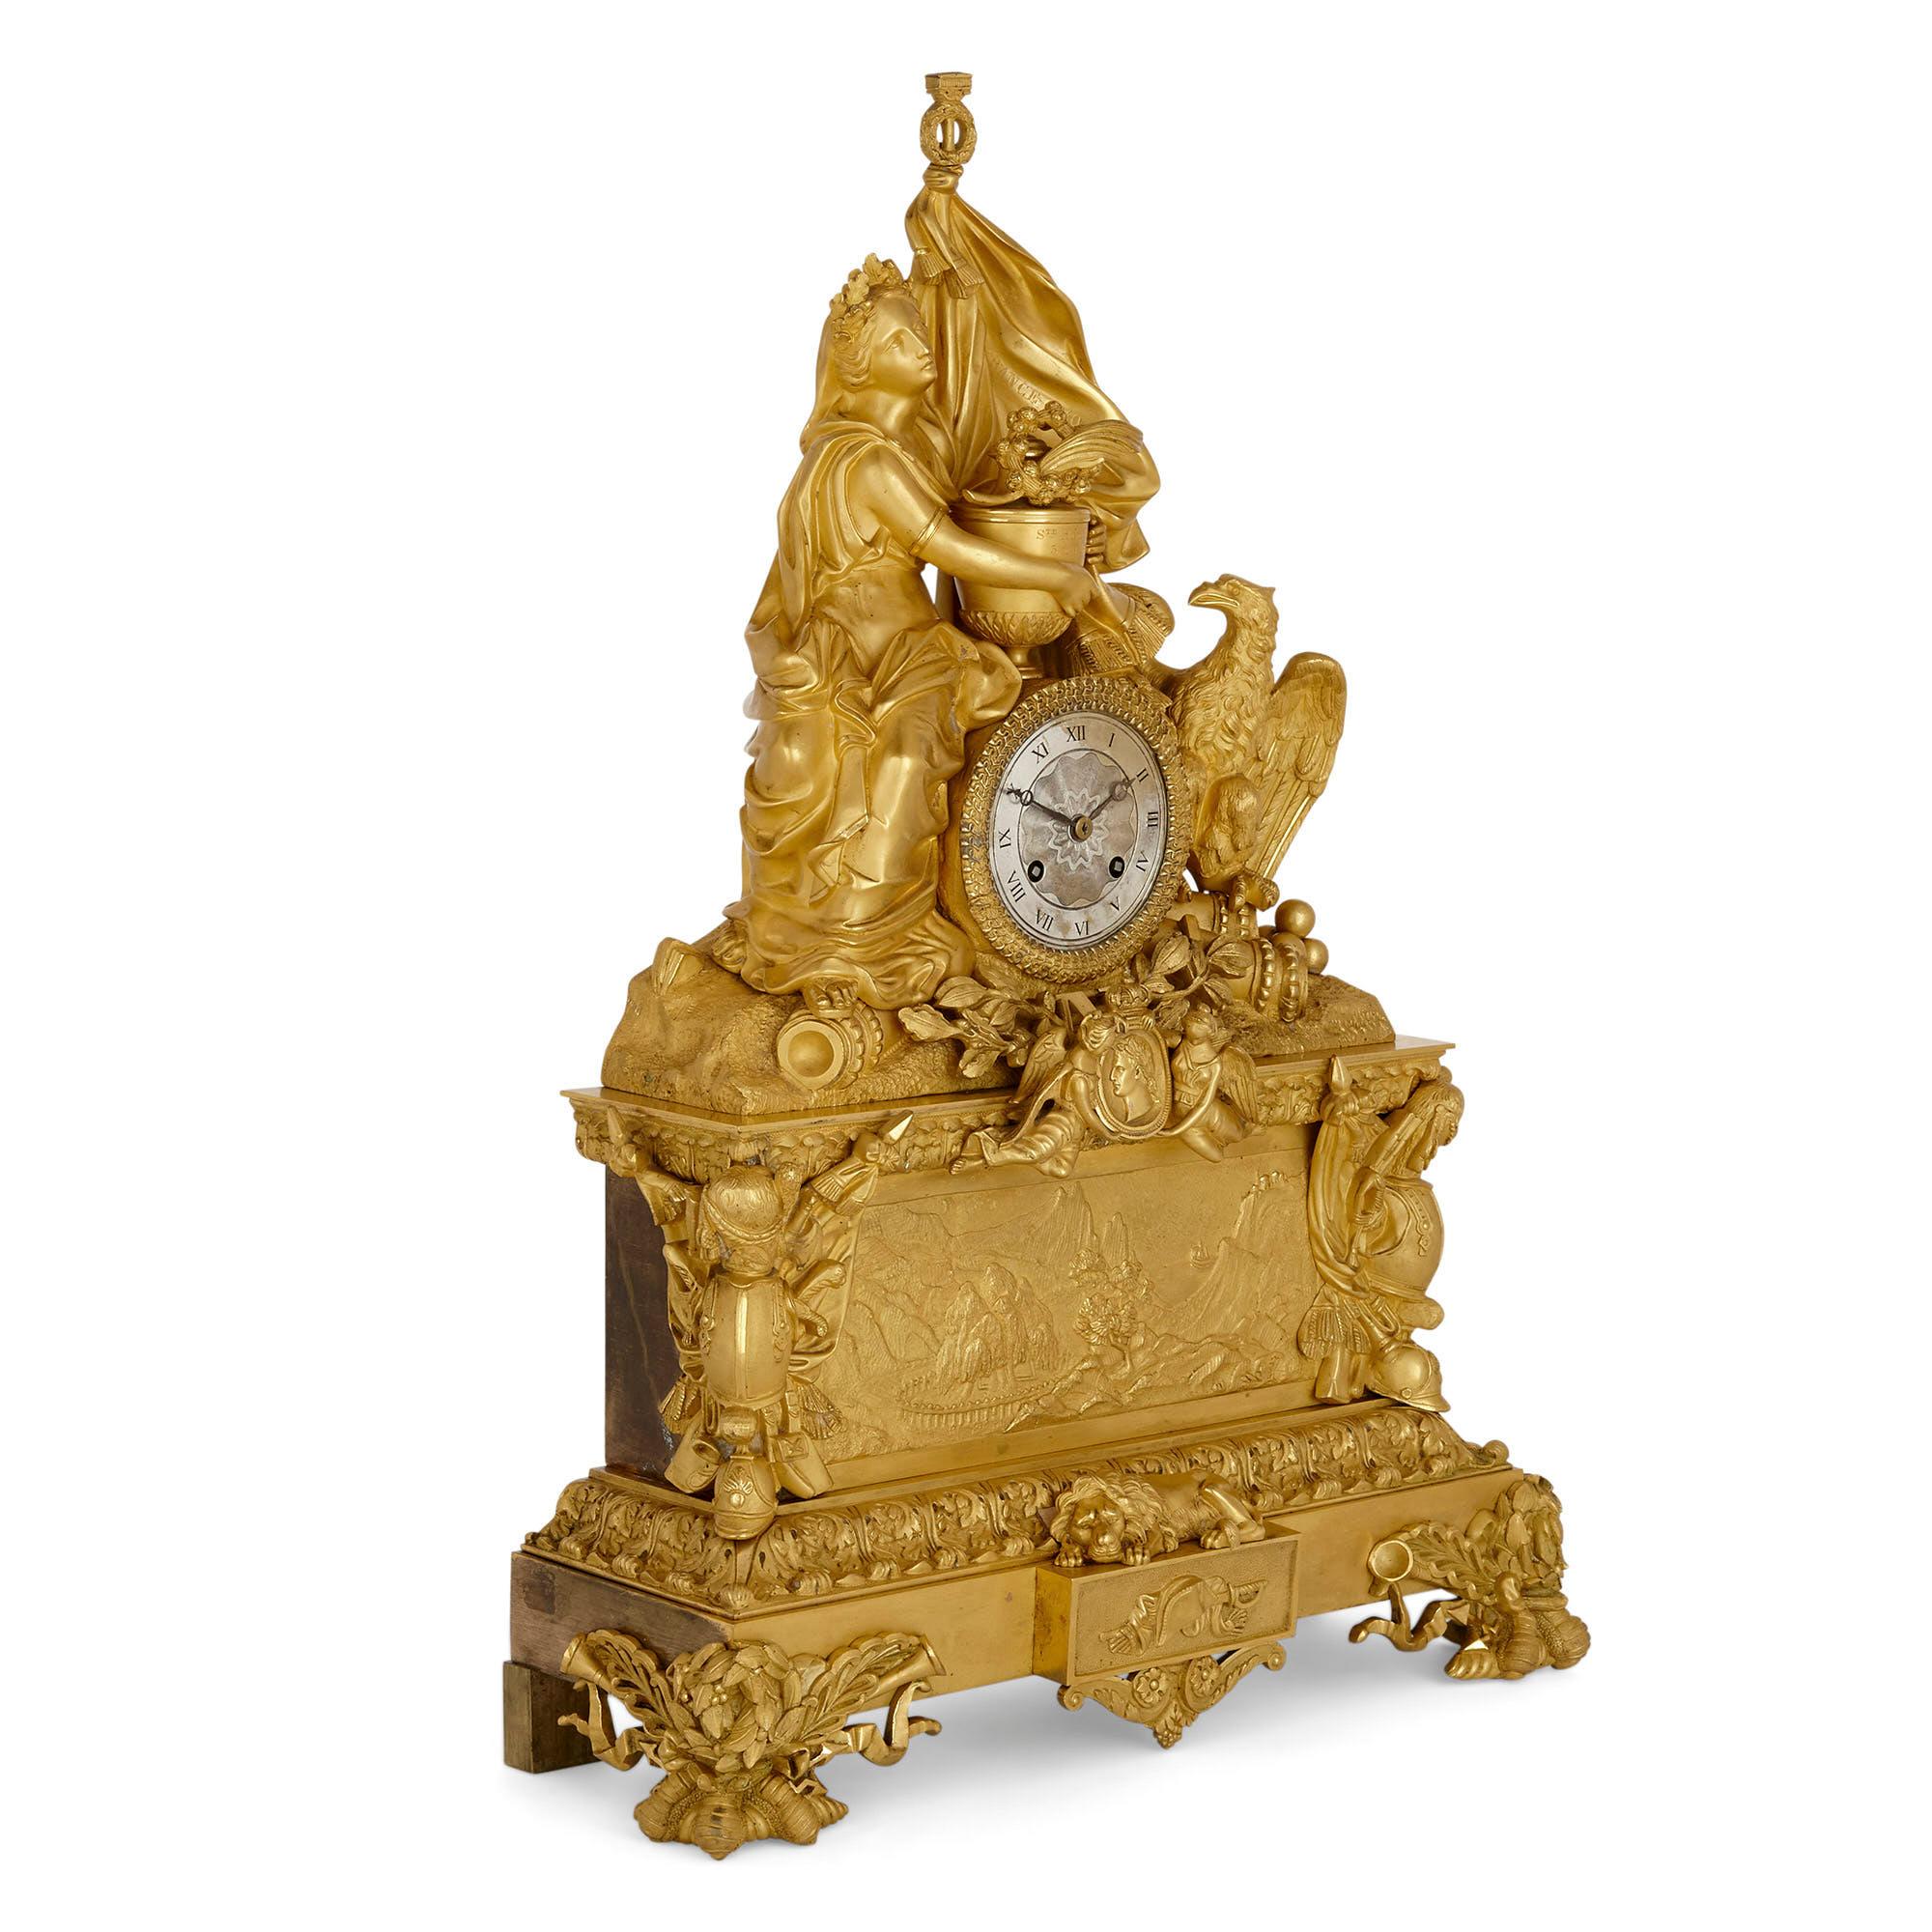 Large gilt bronze mantel clock commemorating Napoleon
French, circa 1840
Measures: Height 57cm, width 40cm, depth 15cm

The gilt bronze mantel clock is set on a rectangular, tiered base with four decorative feet. The lower tier is centered with